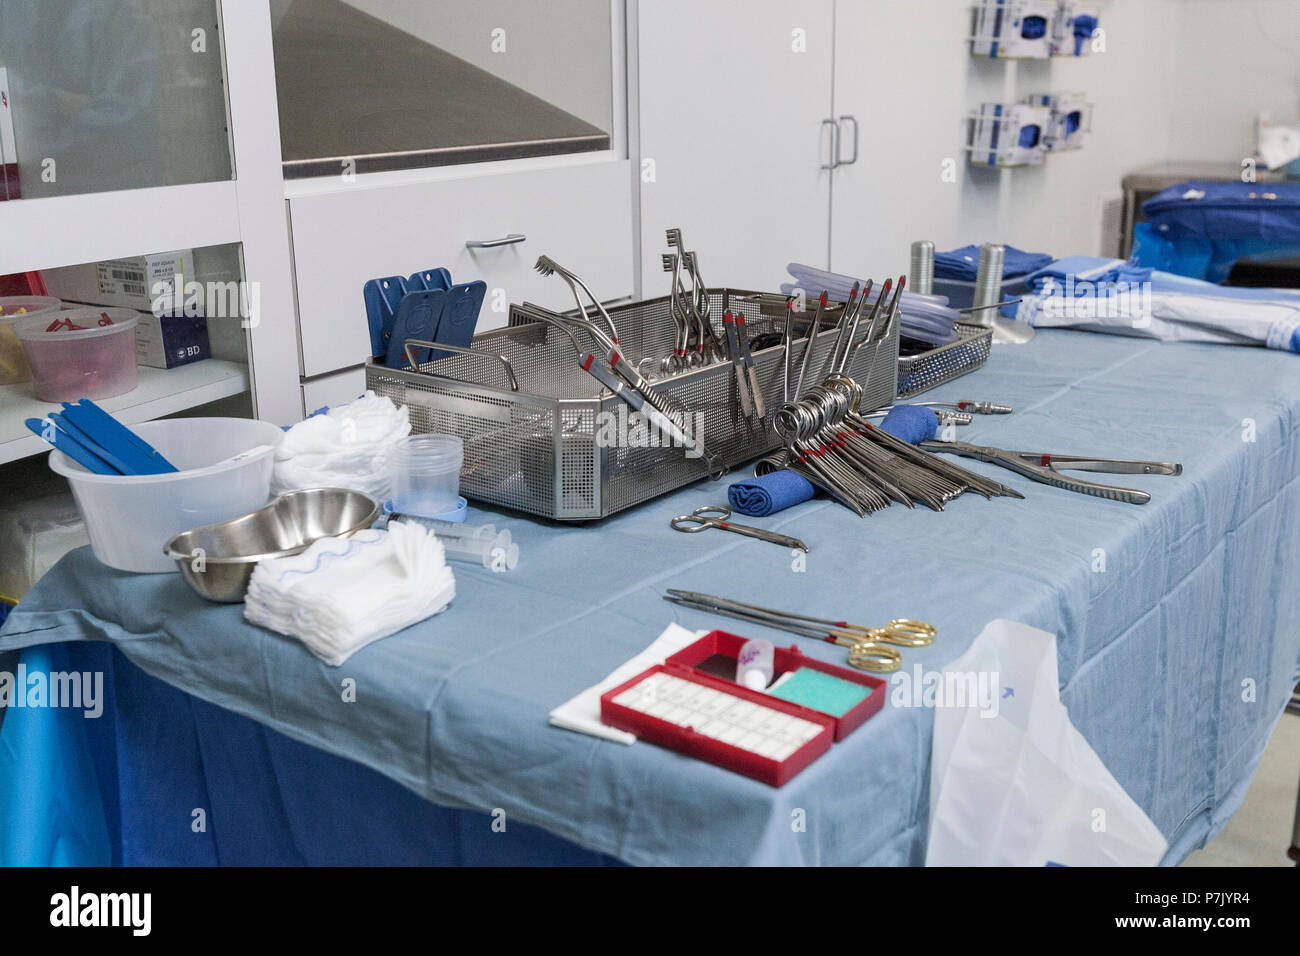 Surgical Instruments On Table Prior To Surgery Stock Photo